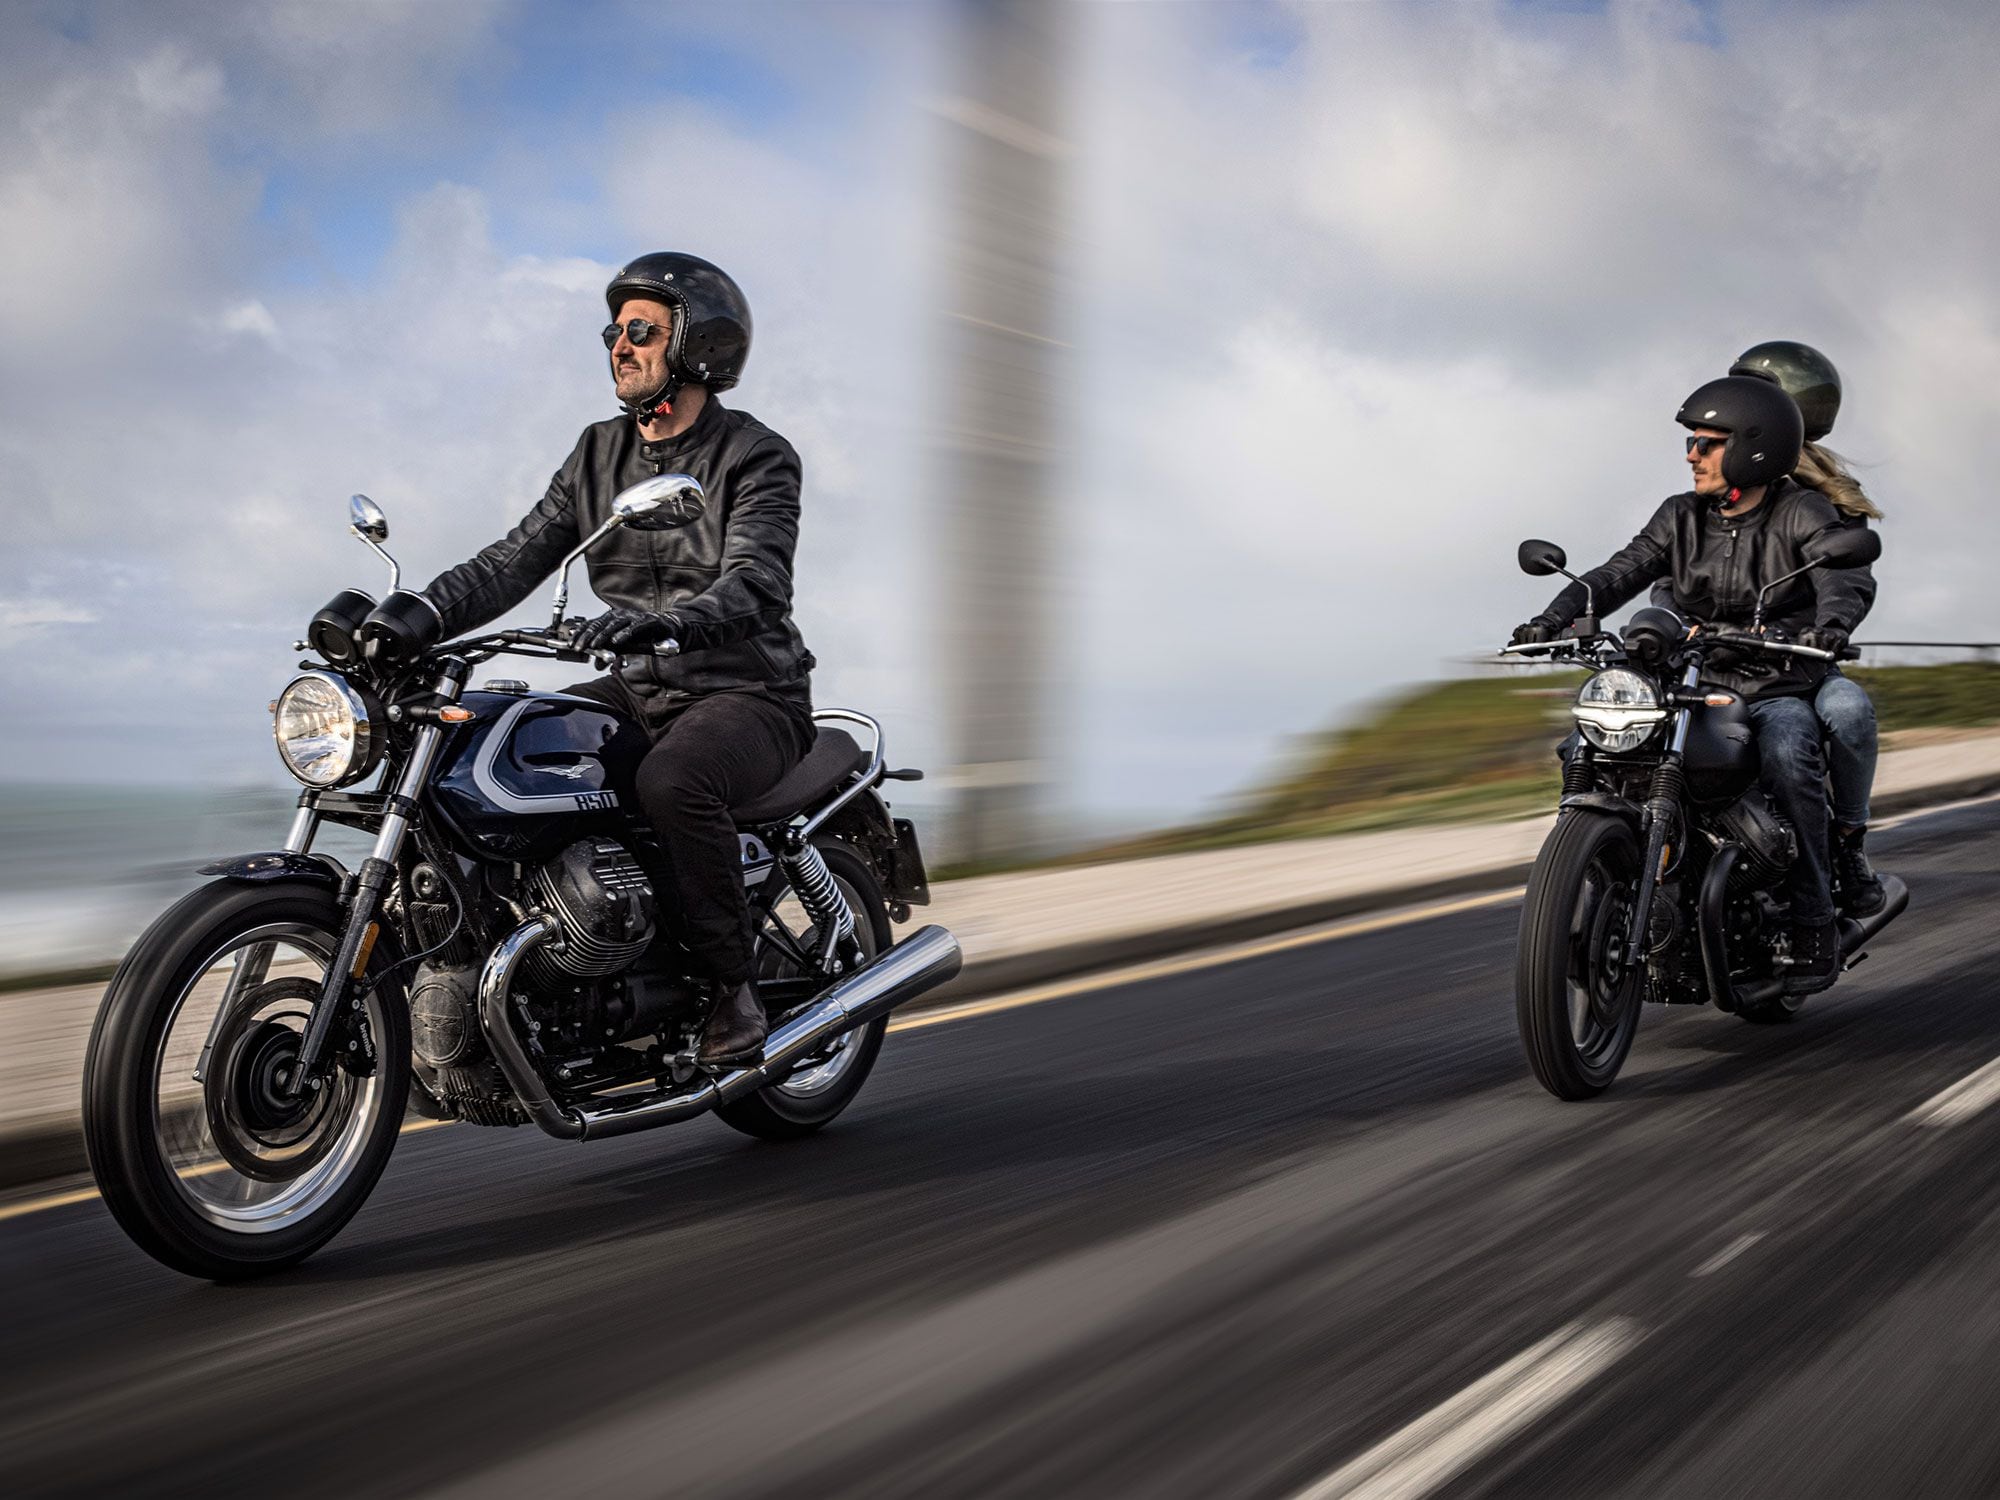 Moto Guzzi’s two revamped 2021 V7 models will hit US and Canada markets by springtime, with a slight price boost.